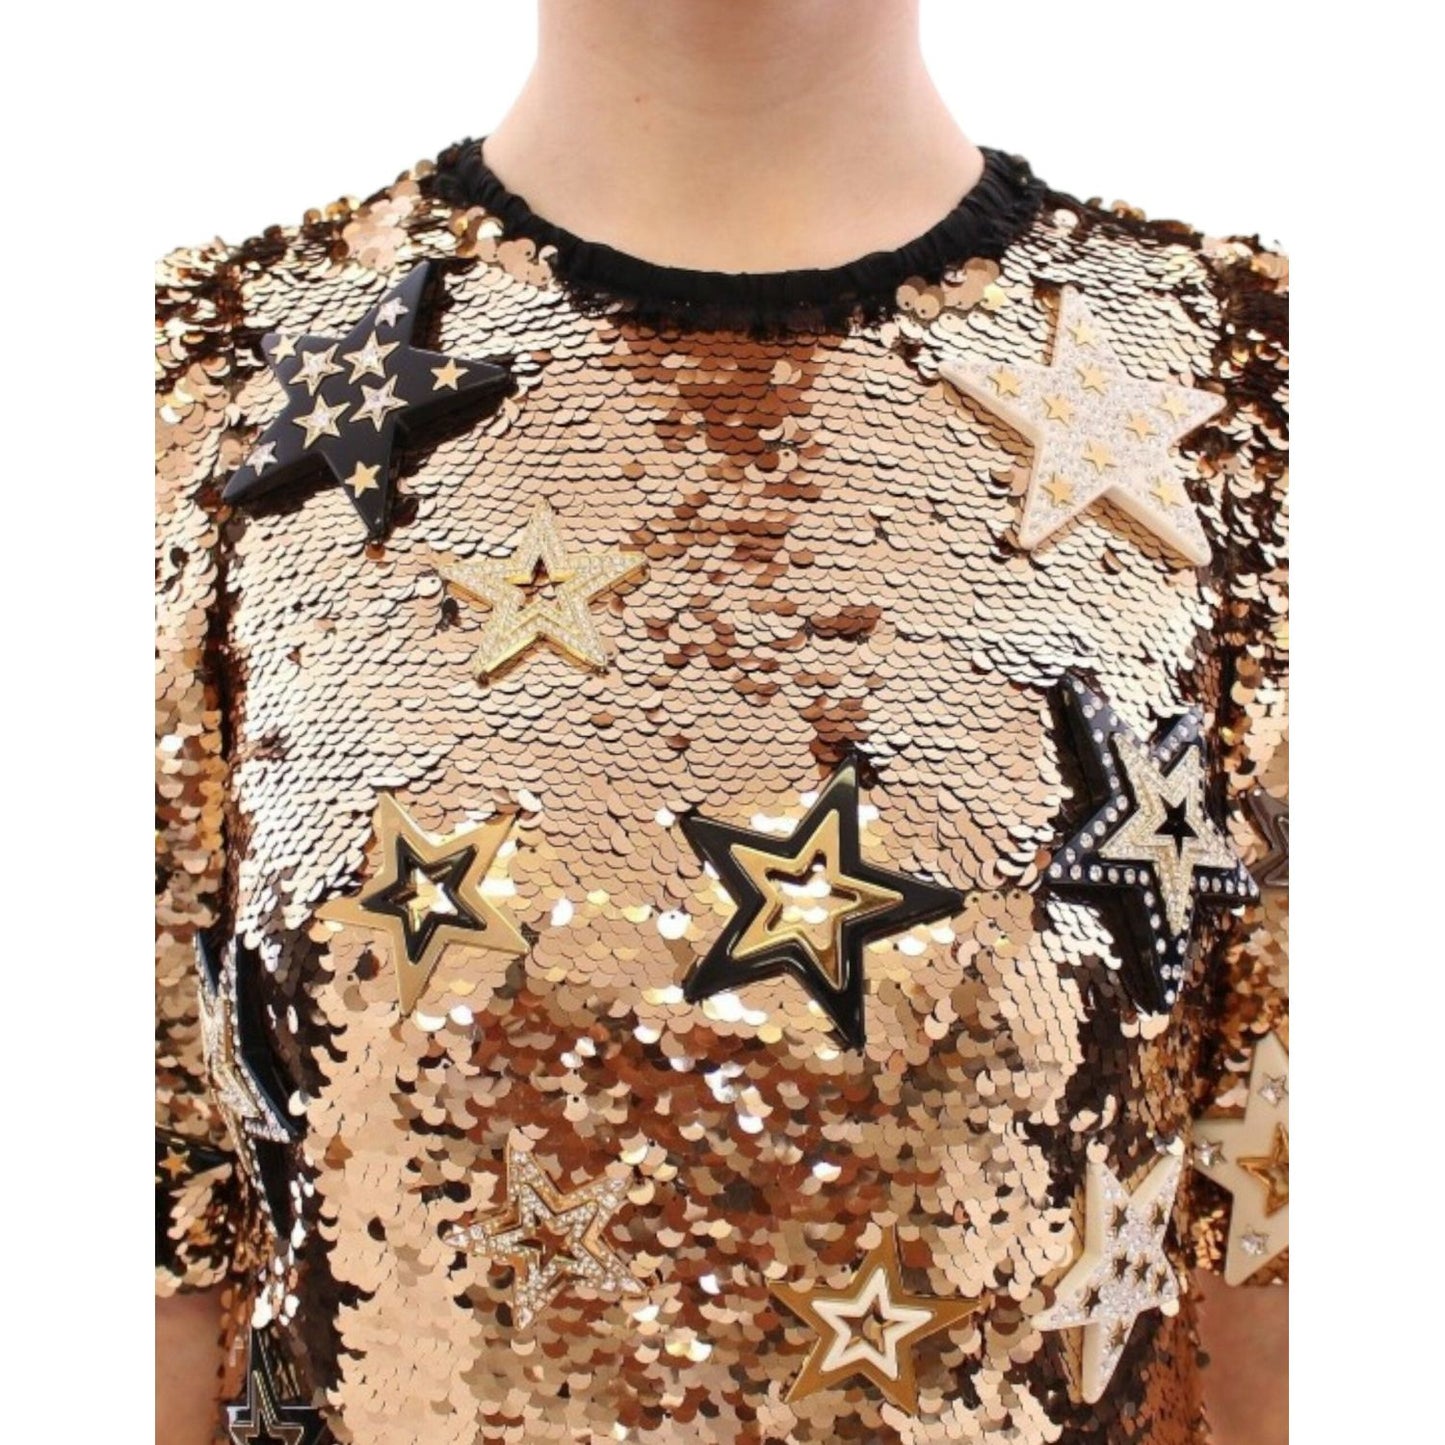 Dolce & Gabbana Exquisite Gold Sequined Star Sheath Dress exquisite-gold-sequined-star-sheath-dress